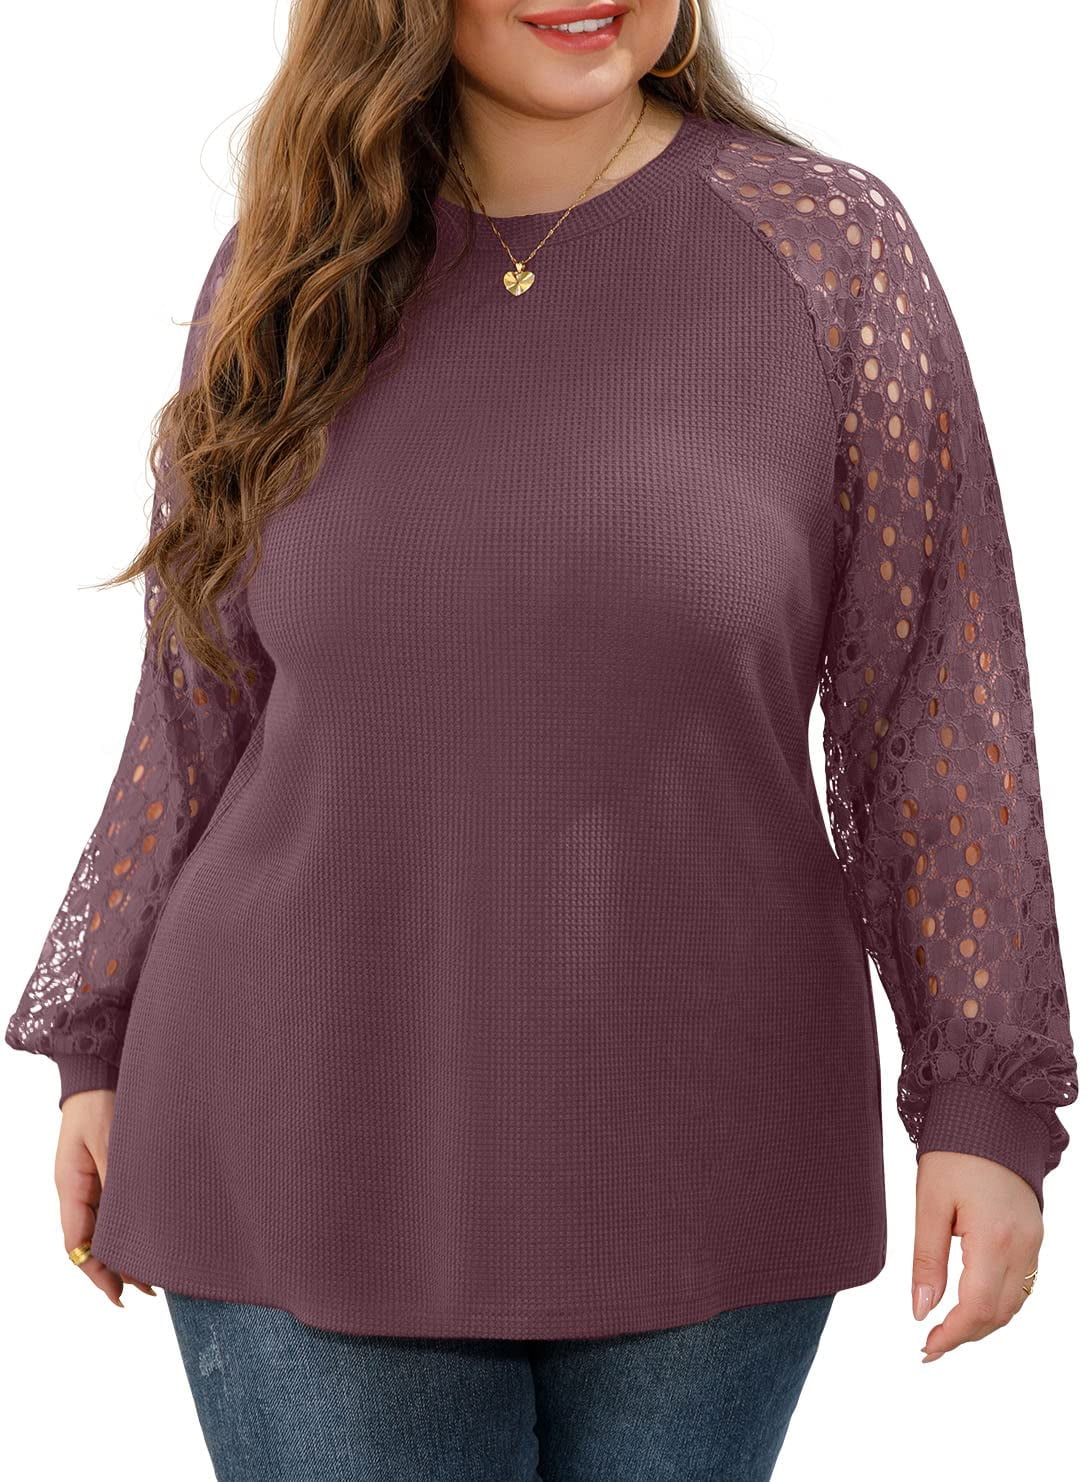 JWD Plus Size Tops For Women Lace Sleeve Blouse Waffle Knit Long Sleeve  Shirts Royal Blue-2X